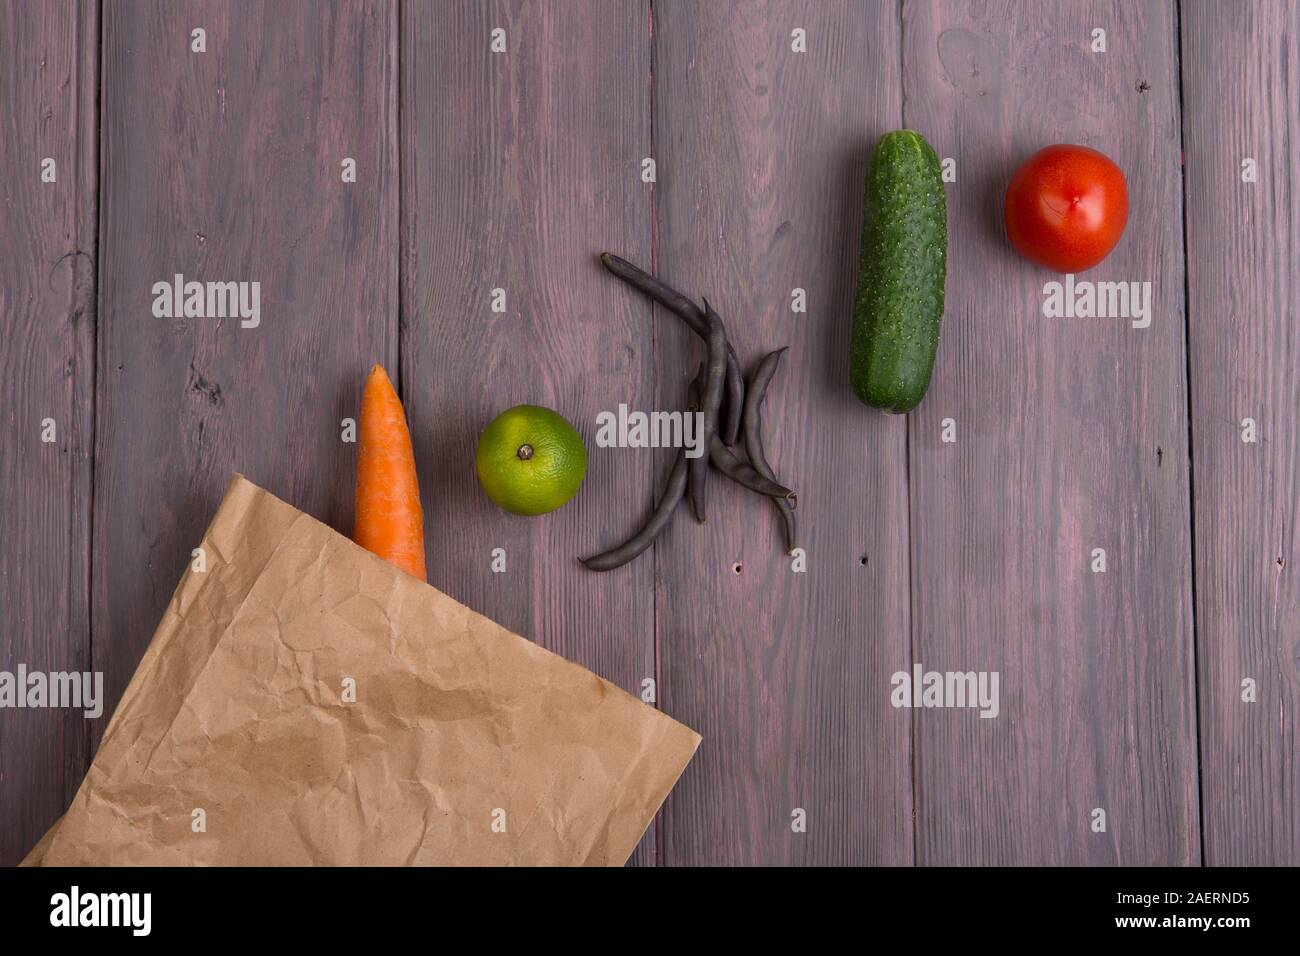 Healthy vegetarian food concept - paper eco bag with various vegetables on wooden table Stock Photo